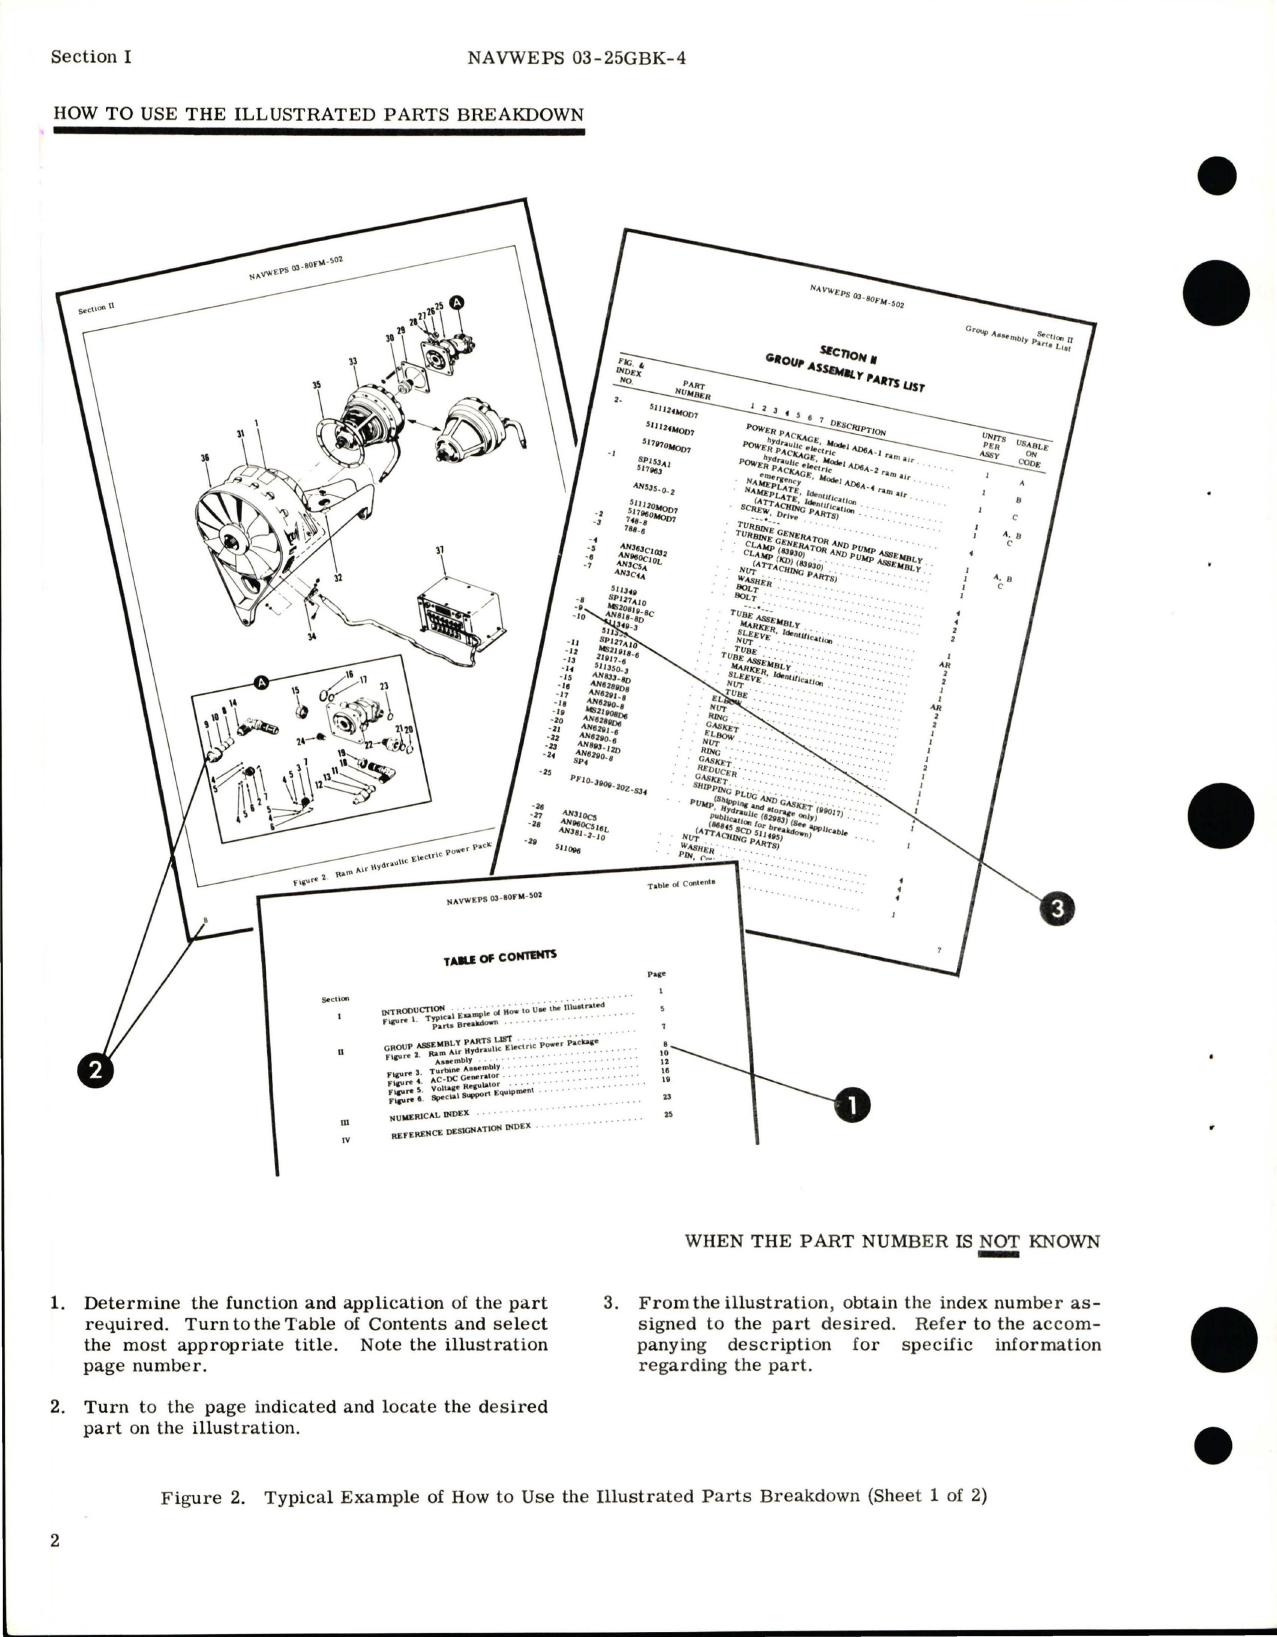 Sample page 6 from AirCorps Library document: Illustrated Parts Breakdown for Electro-Hydraulic Tandem Power Control Cylinder - Parts 16150-7, 16150-8, 16150-11, 16150-12, 16150-13, and 16150-14